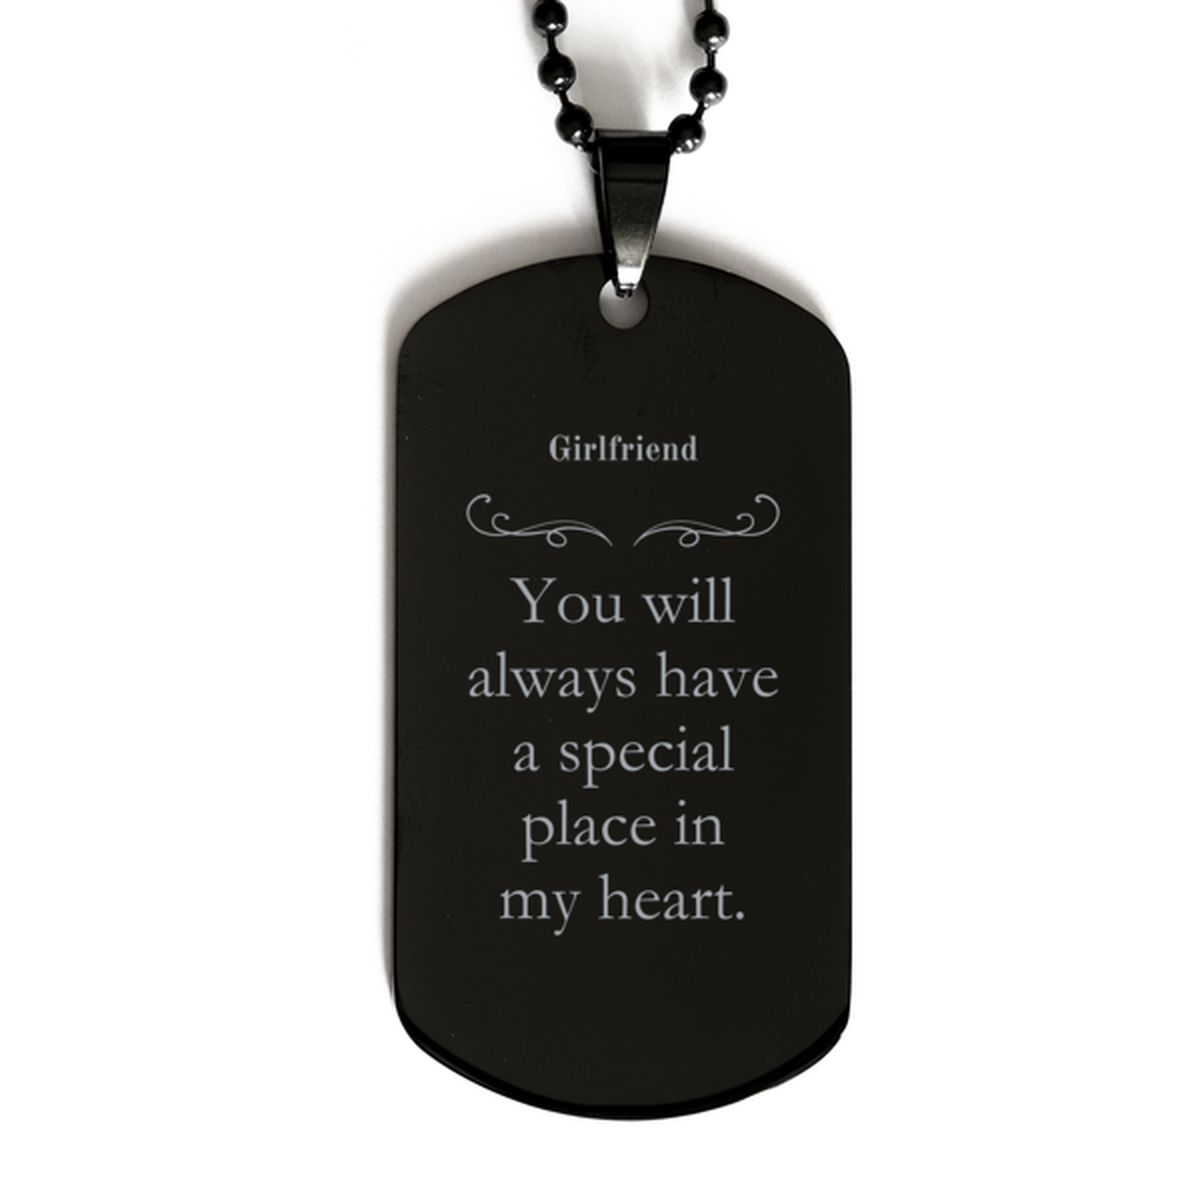 Girlfriend Black Dog Tag Engraved Special Place Heart Memorial Gift for Her Wedding Anniversary Veterans Day